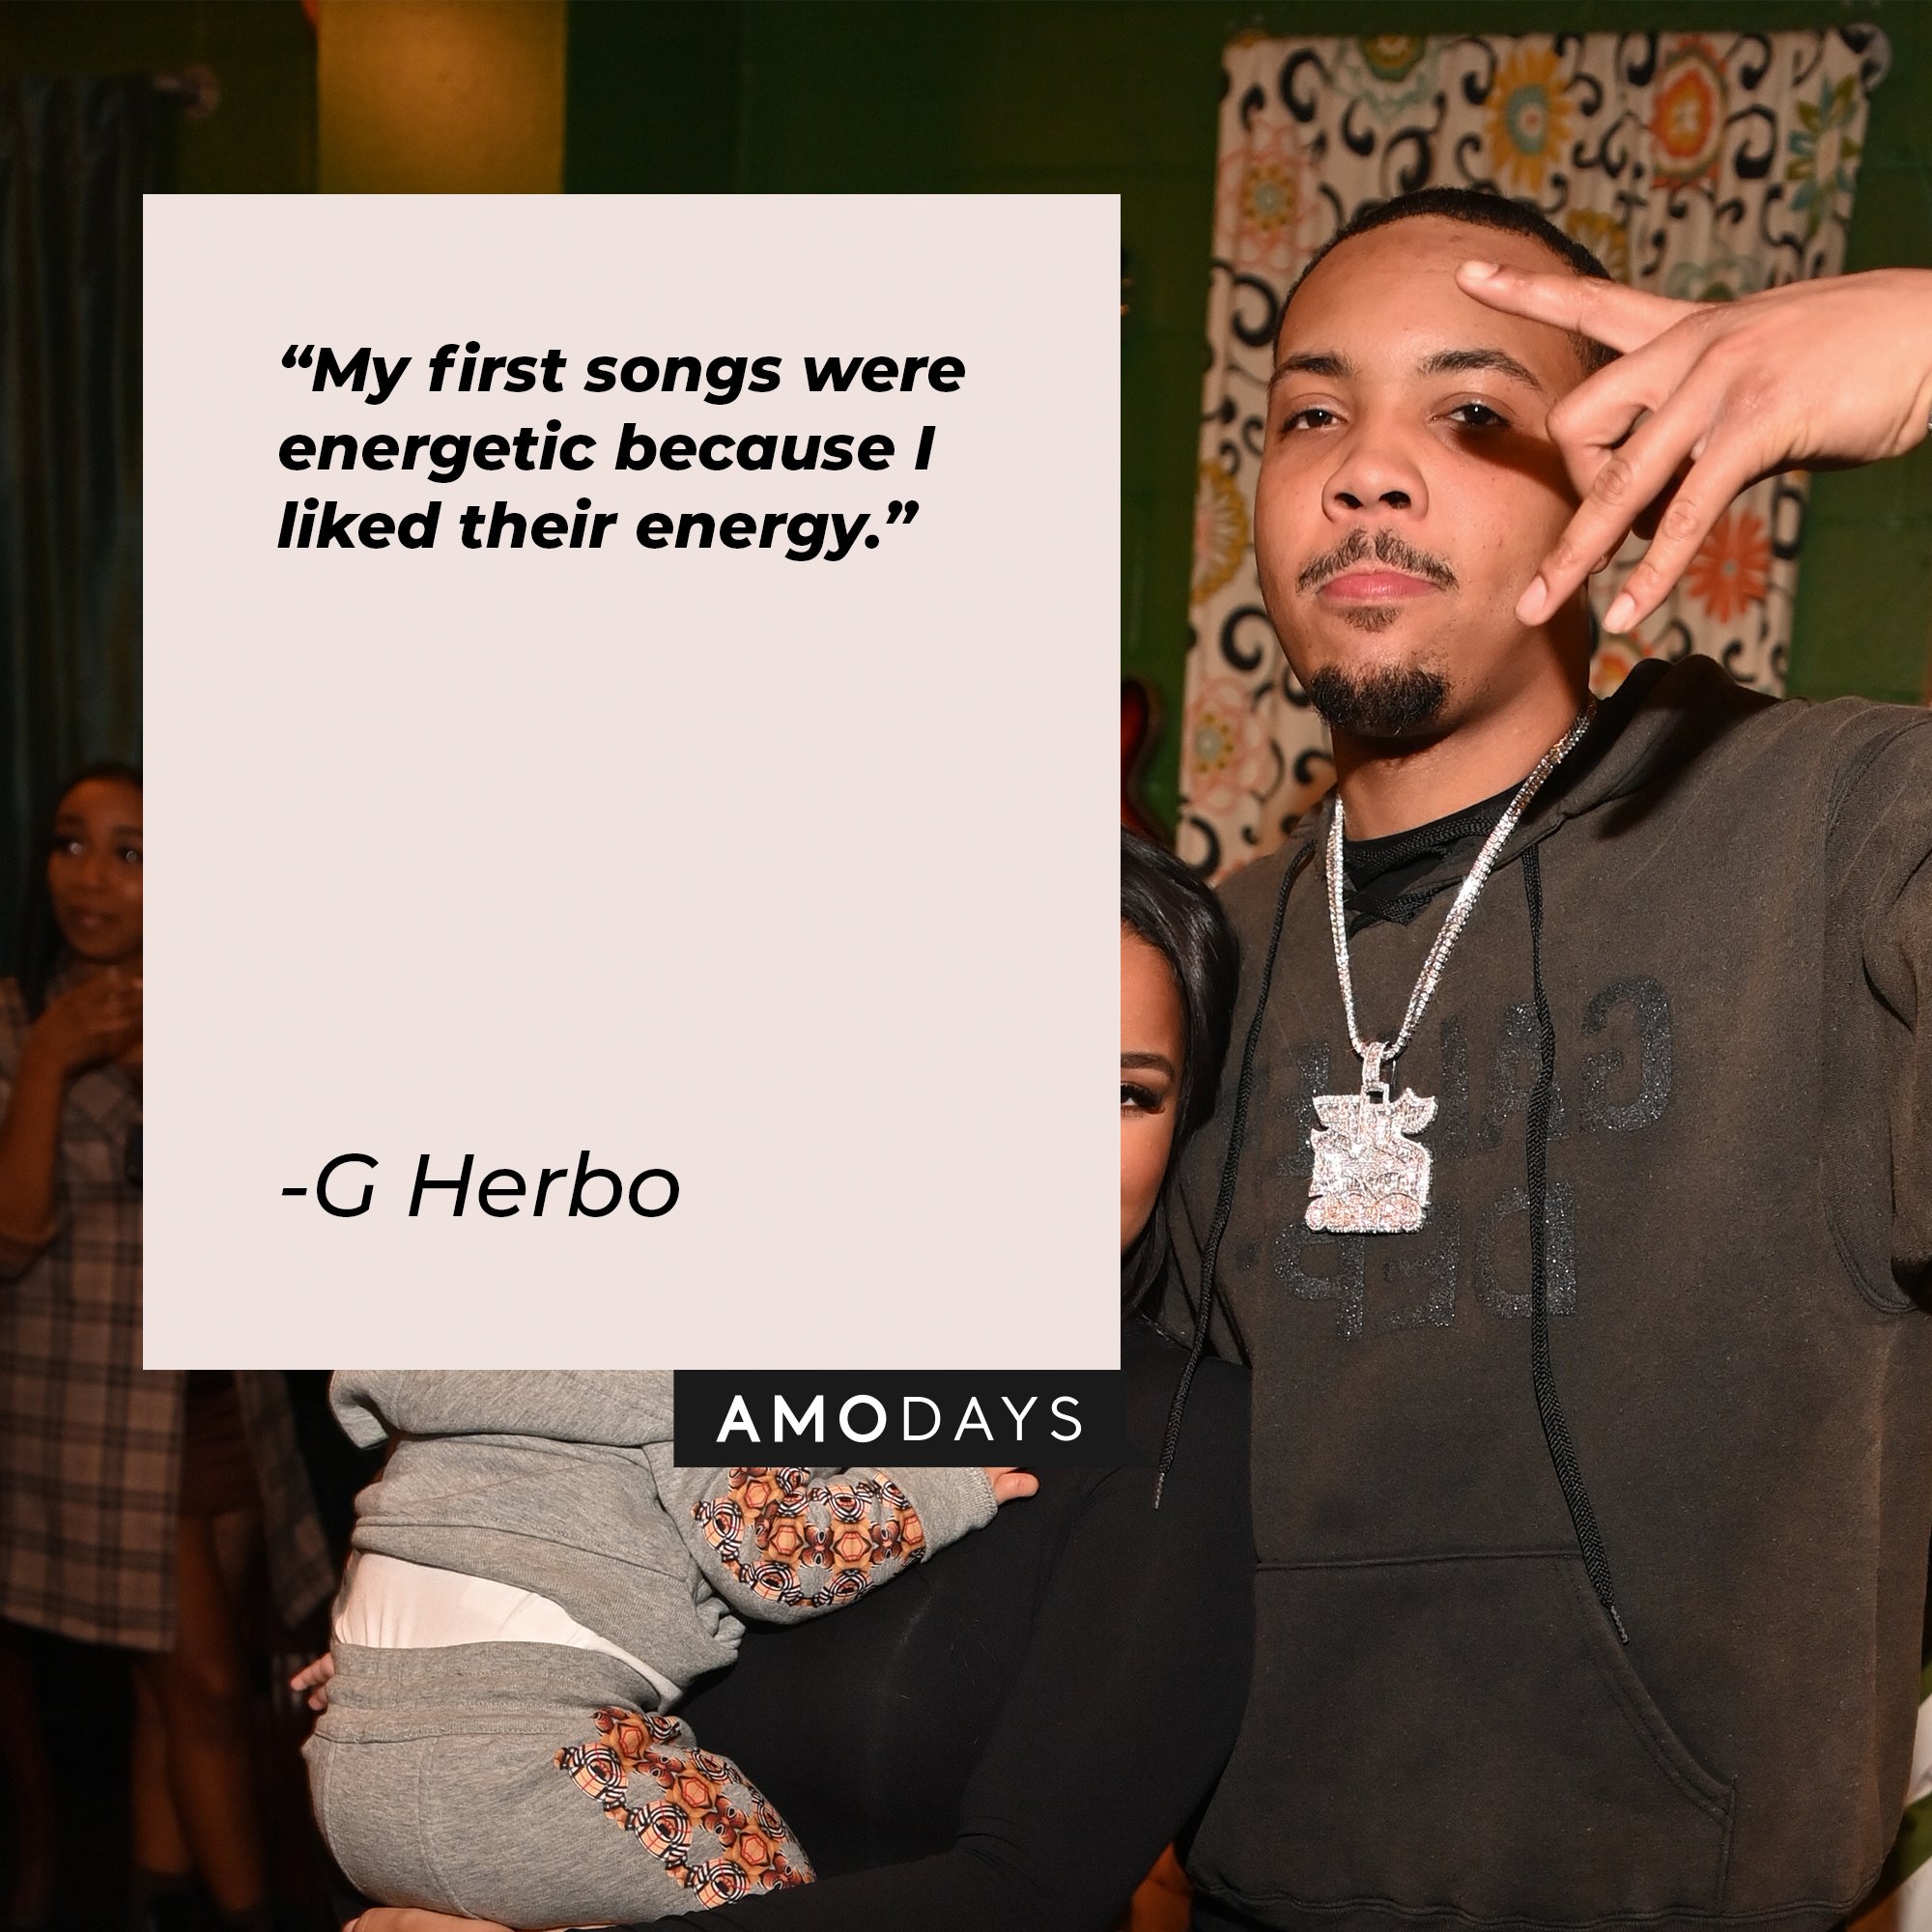 G Herbo’s quote: "My first songs were energetic because I liked their energy." | Image: AmoDays 